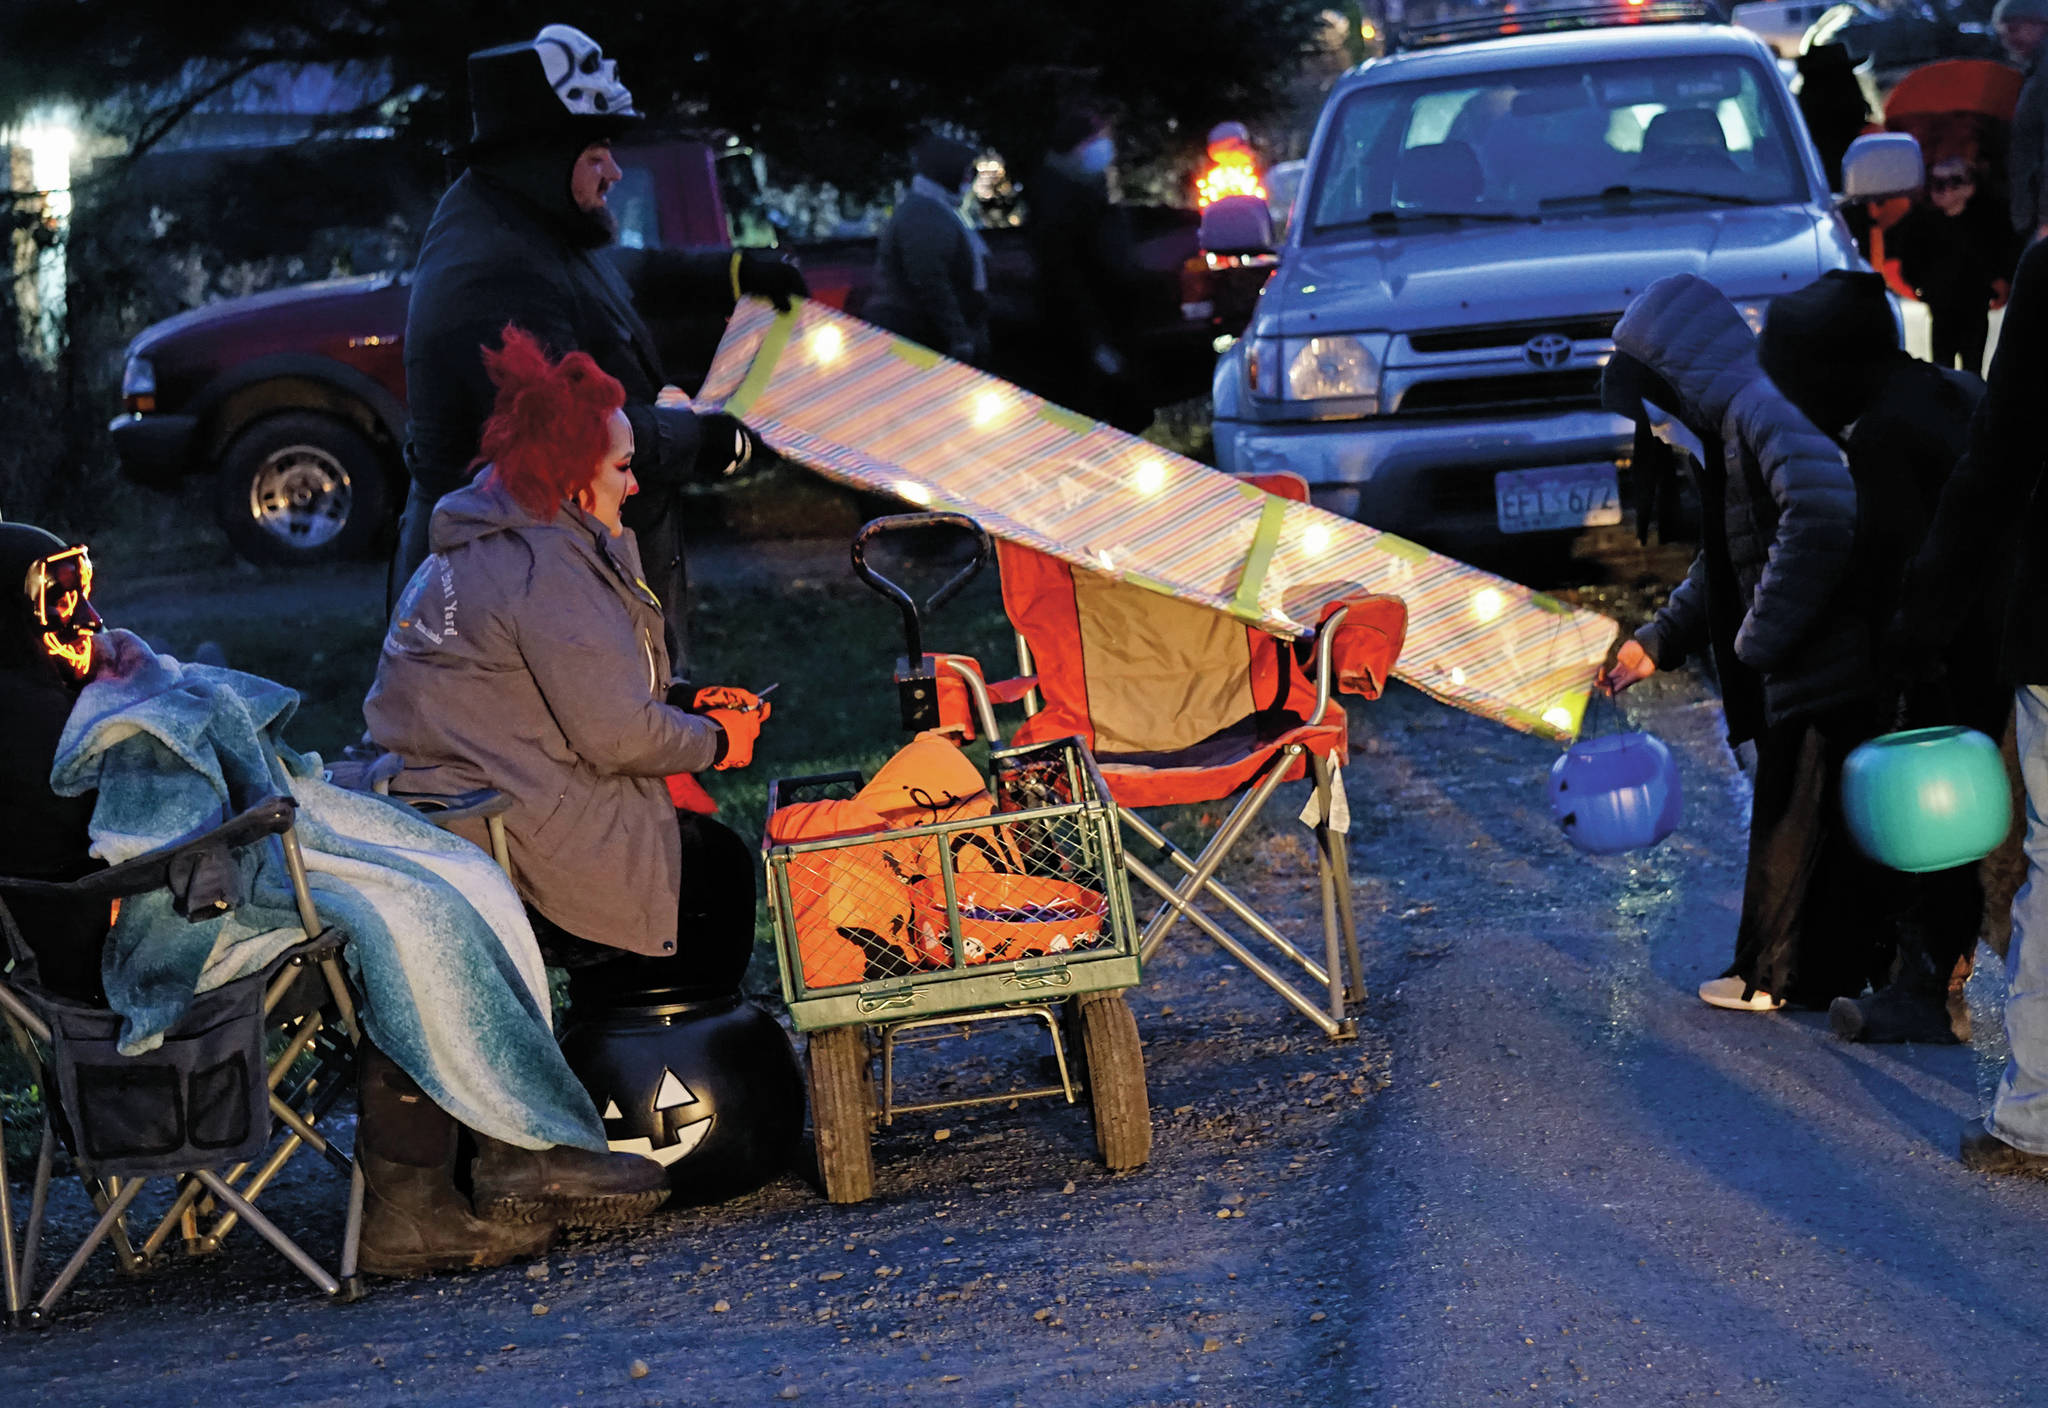 Aaron Fleenor, at top, uses a chute to distribute candy on Halloween night, Oct. 31, 2020, in downtown Homer, Alaska. Helping are Amber Fleenor, center, and Shade Fleenor, left. Because of COVID-19 safety concerns, some people created devices like this to give candy away while keeping social distance. Trick or treating was more subdued than usual, but still drew children in costume to neighborhood above Pioneer Avenue. (Photo by Michael Armstrong/Homer News)